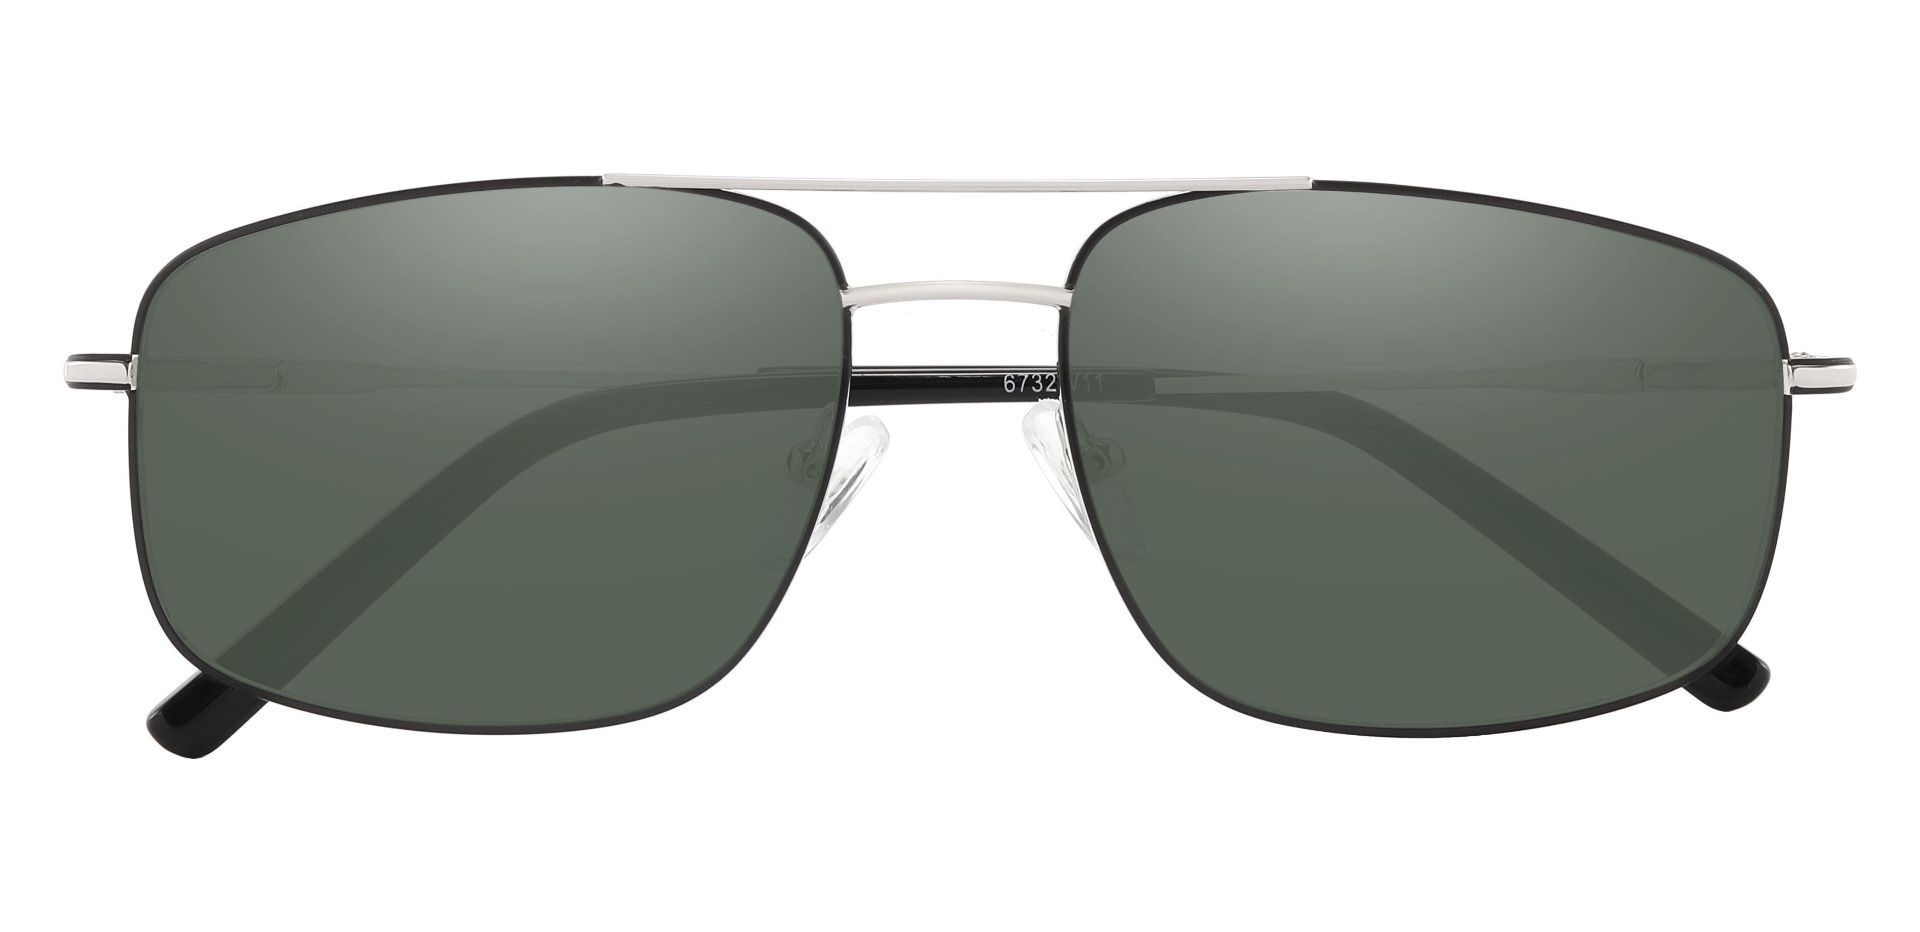 Turner Aviator Lined Bifocal Sunglasses - Silver Frame With Green Lenses